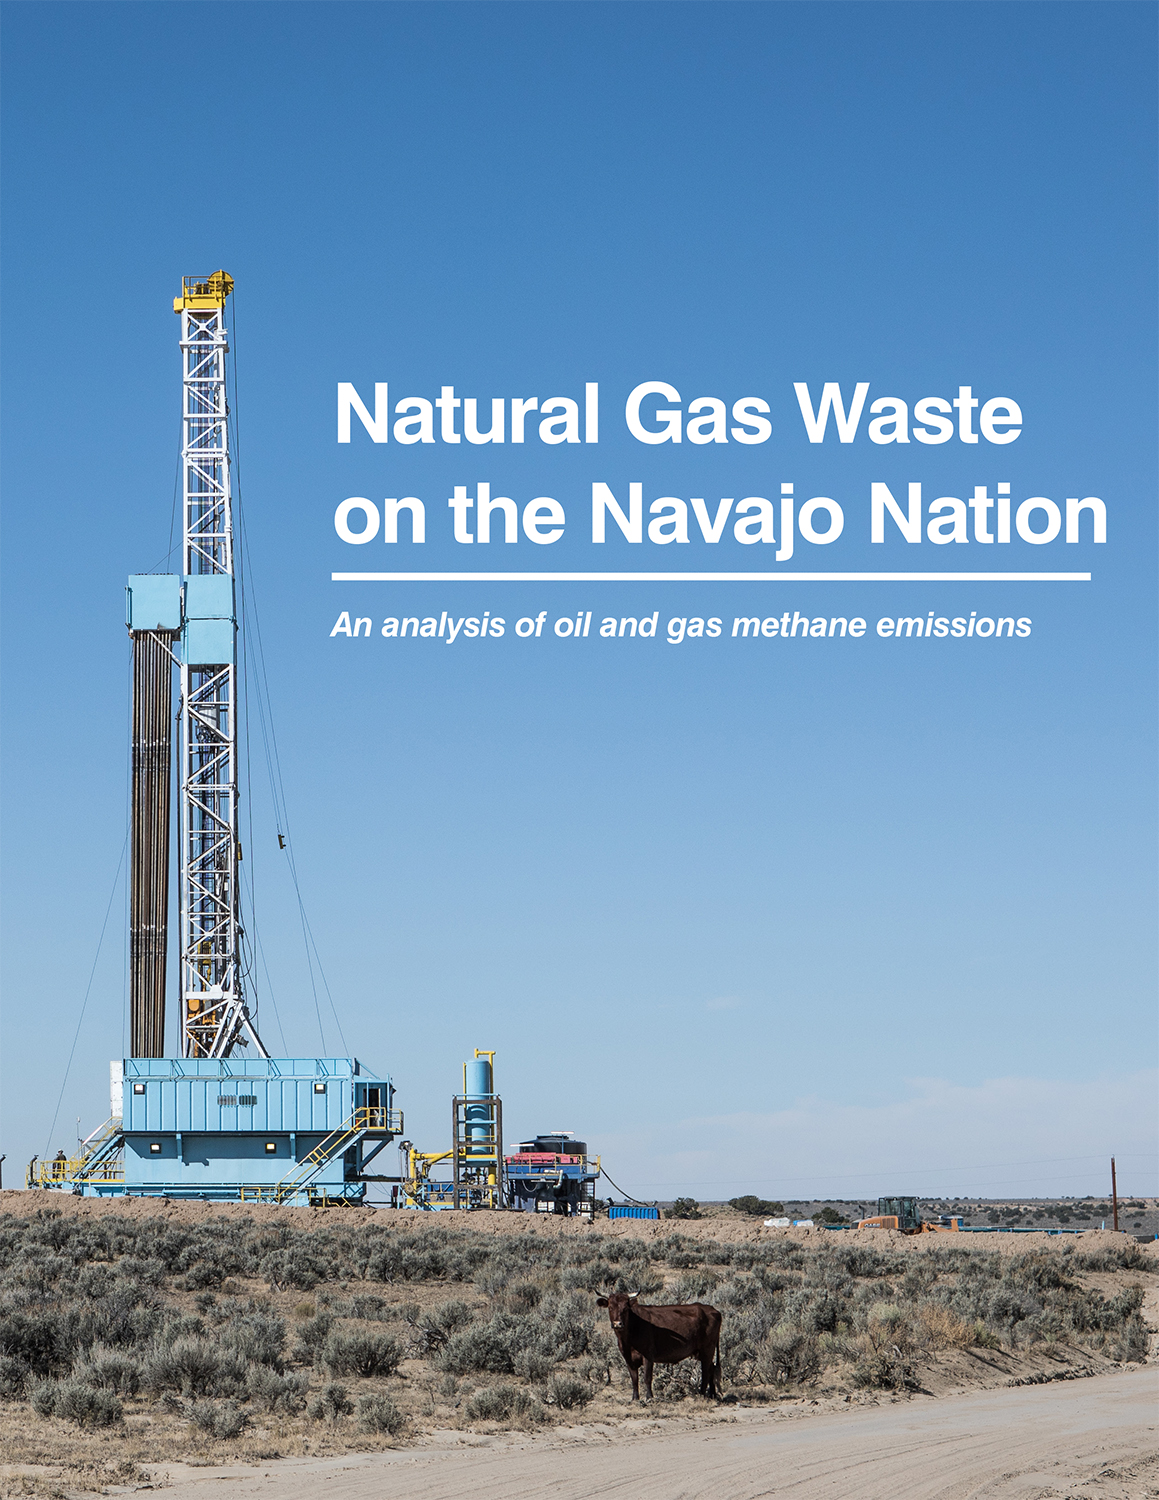 Natural Gas Waste on the Navajo Nation